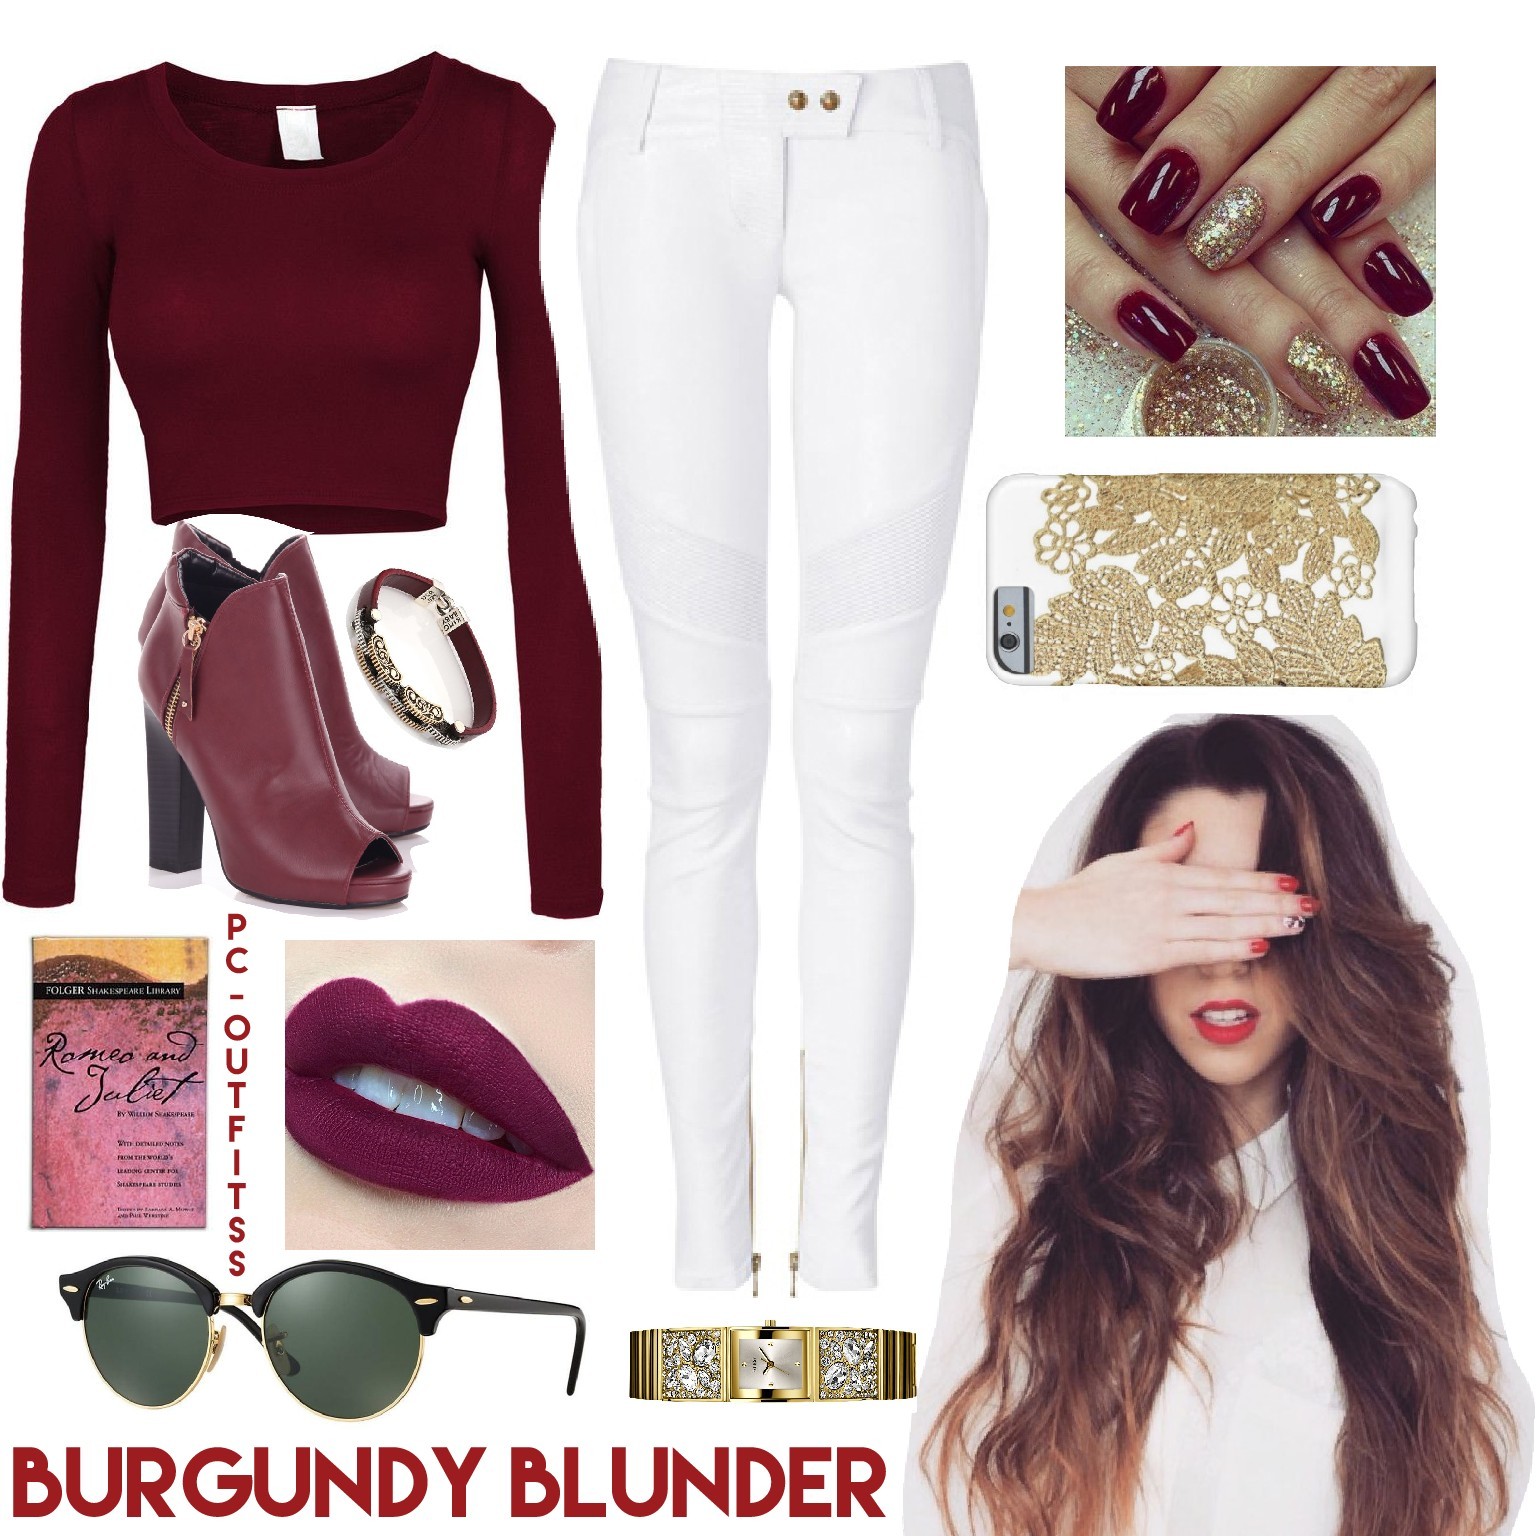 burgundy blunderrr. Bad or Rad?? TELL ME IN THE COMMENTS...